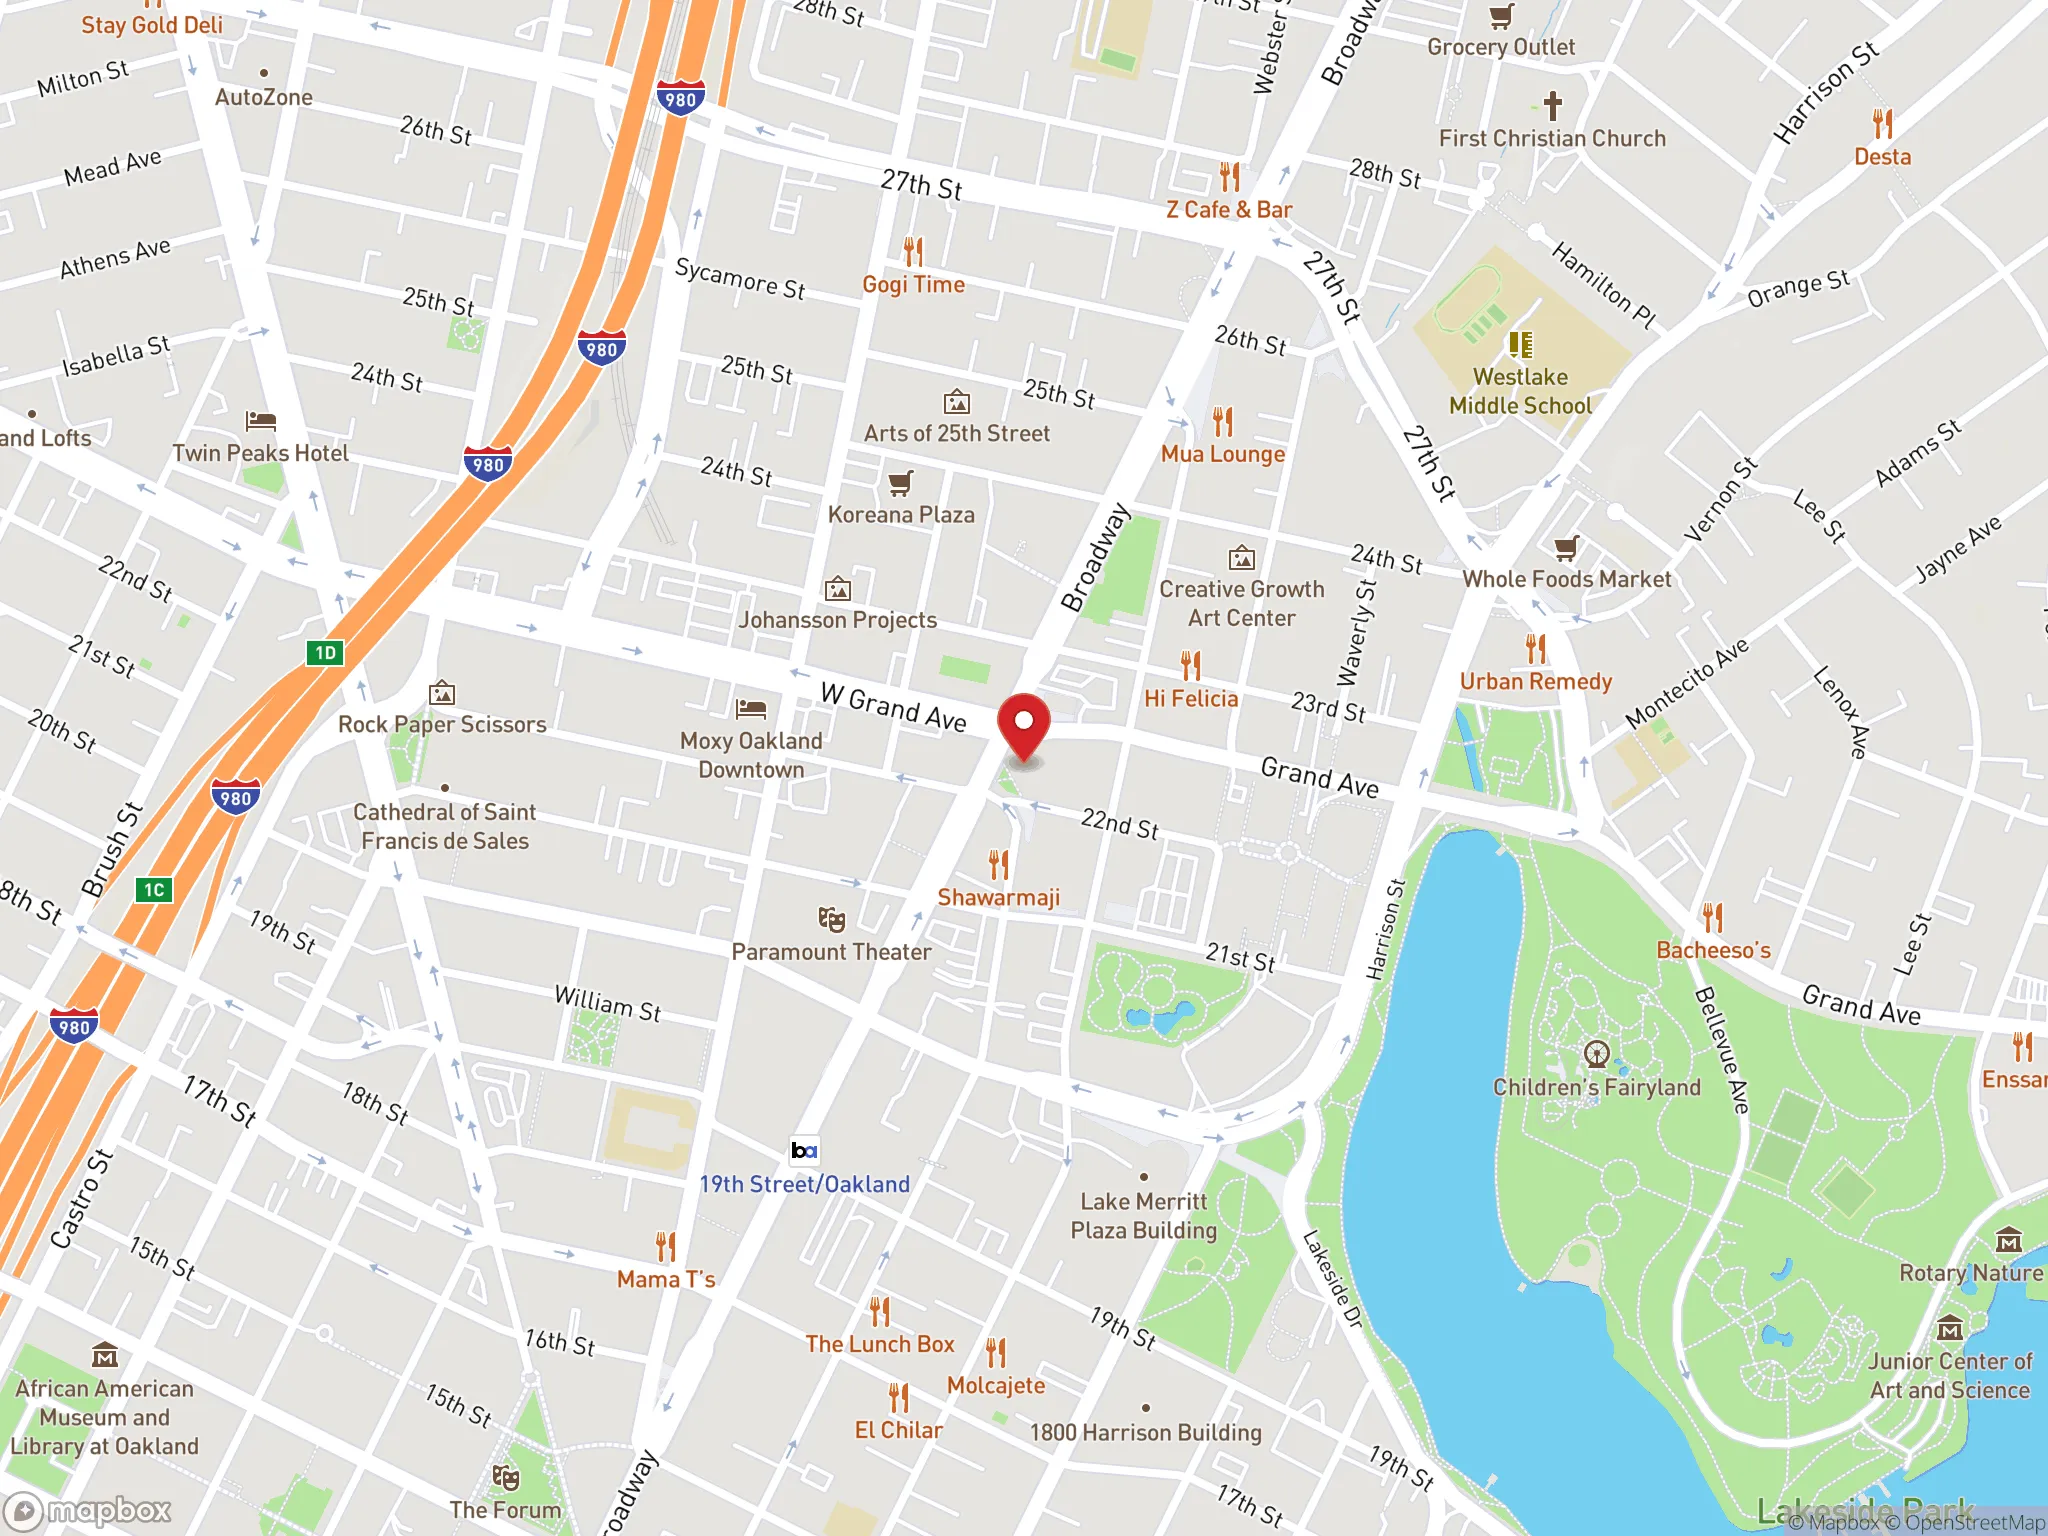 Map showing location of Dave's Hot Chicken restaurant in Oakland, California.